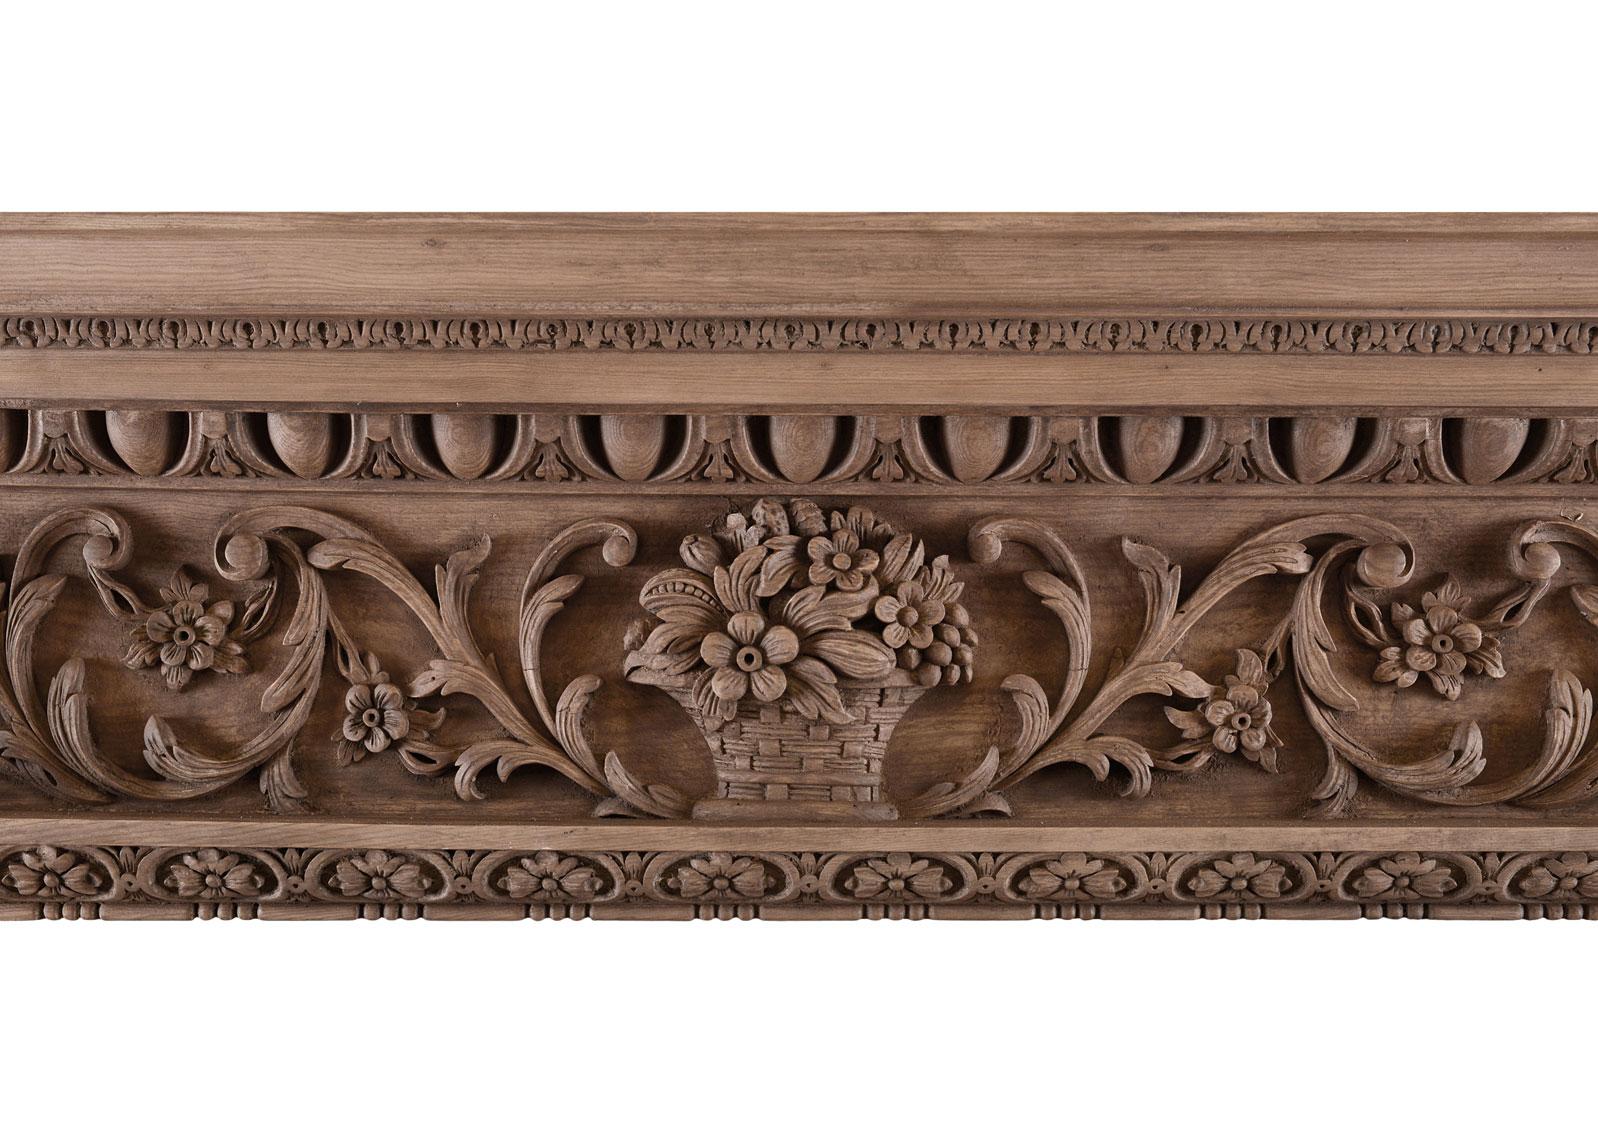 A heavily carved English timber fireplace. The jambs with inlaid panel of carved fruit and flowers surmounted by carved brackets with cartouche, flower and scrolls. The frieze with basket of flowers to centre flanked by scrolled leaf work. The shelf